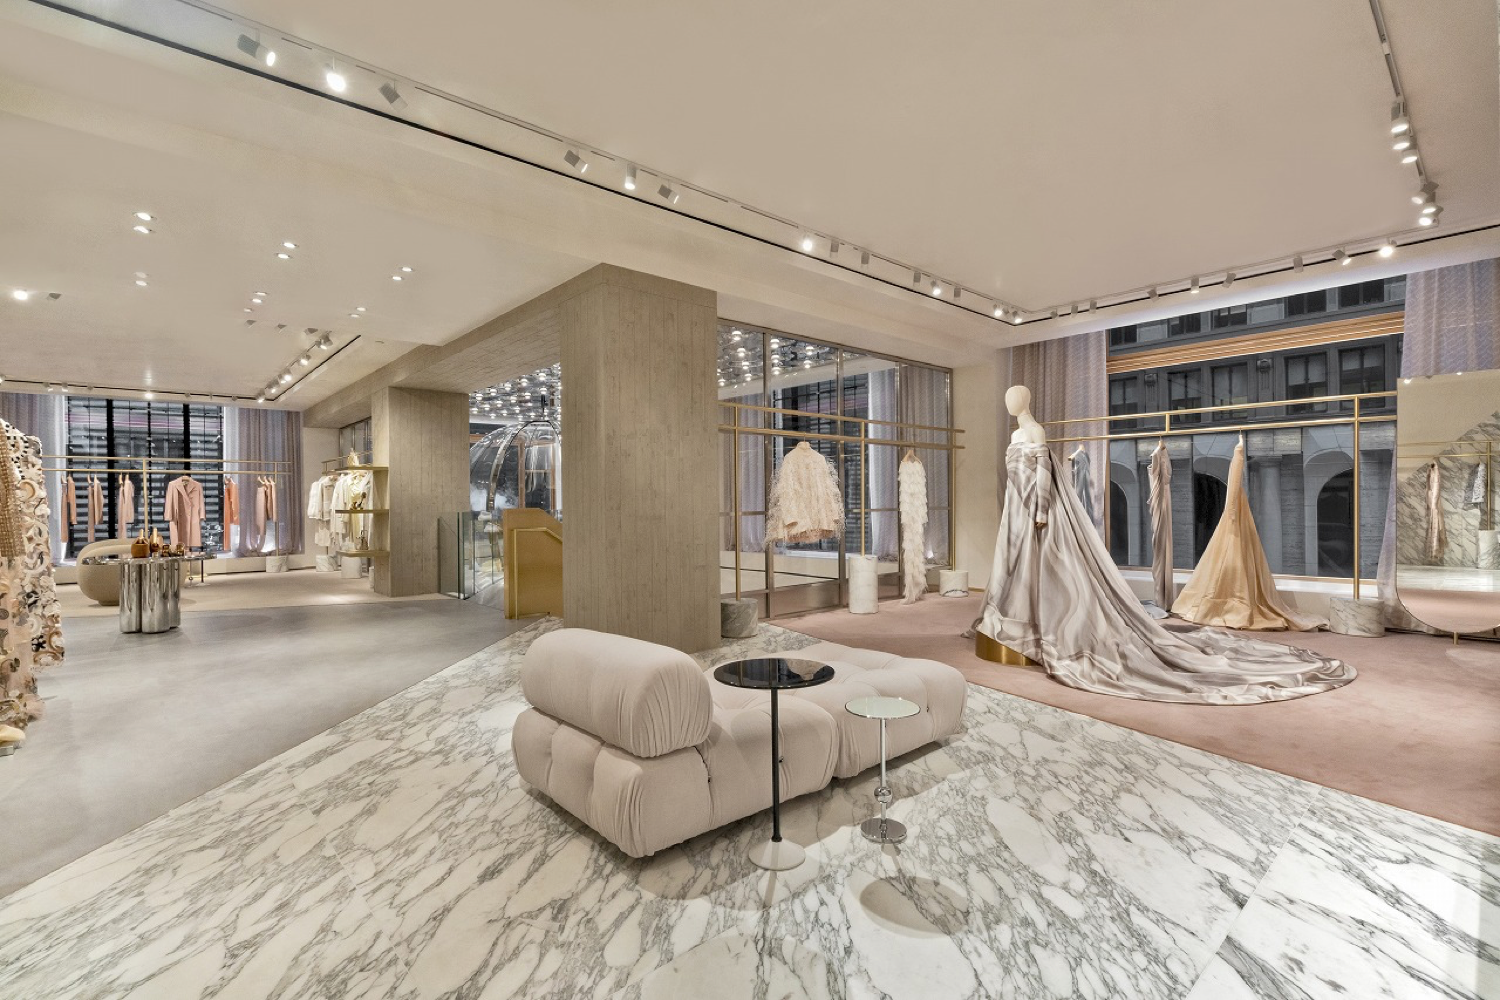 Fendi Heightens Luxury Factor With Boutique on Rue Saint Honoré – WWD